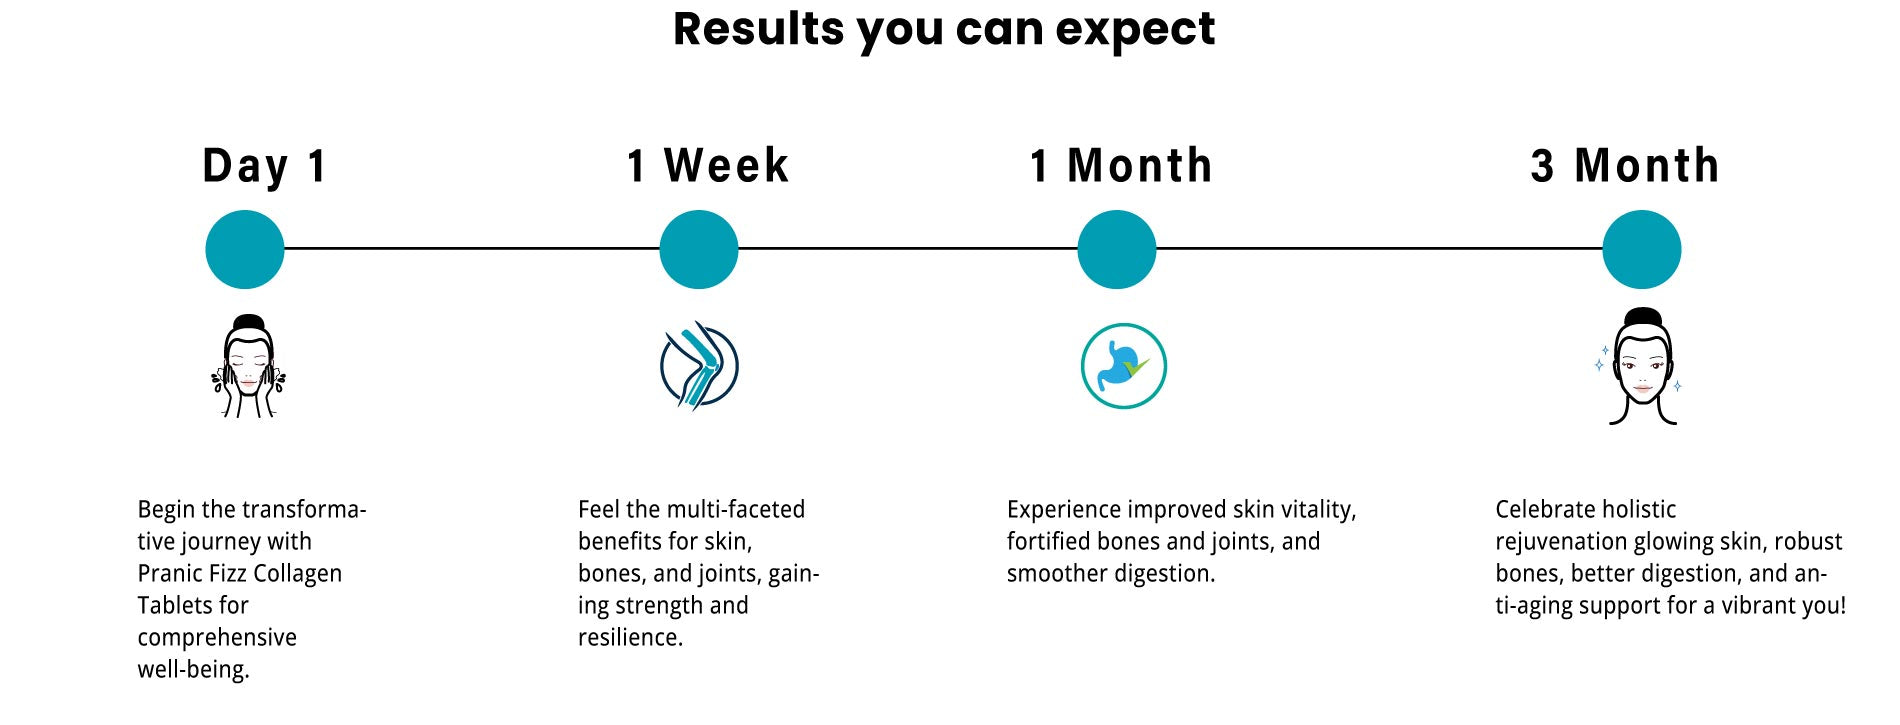 Collagen results you can expect